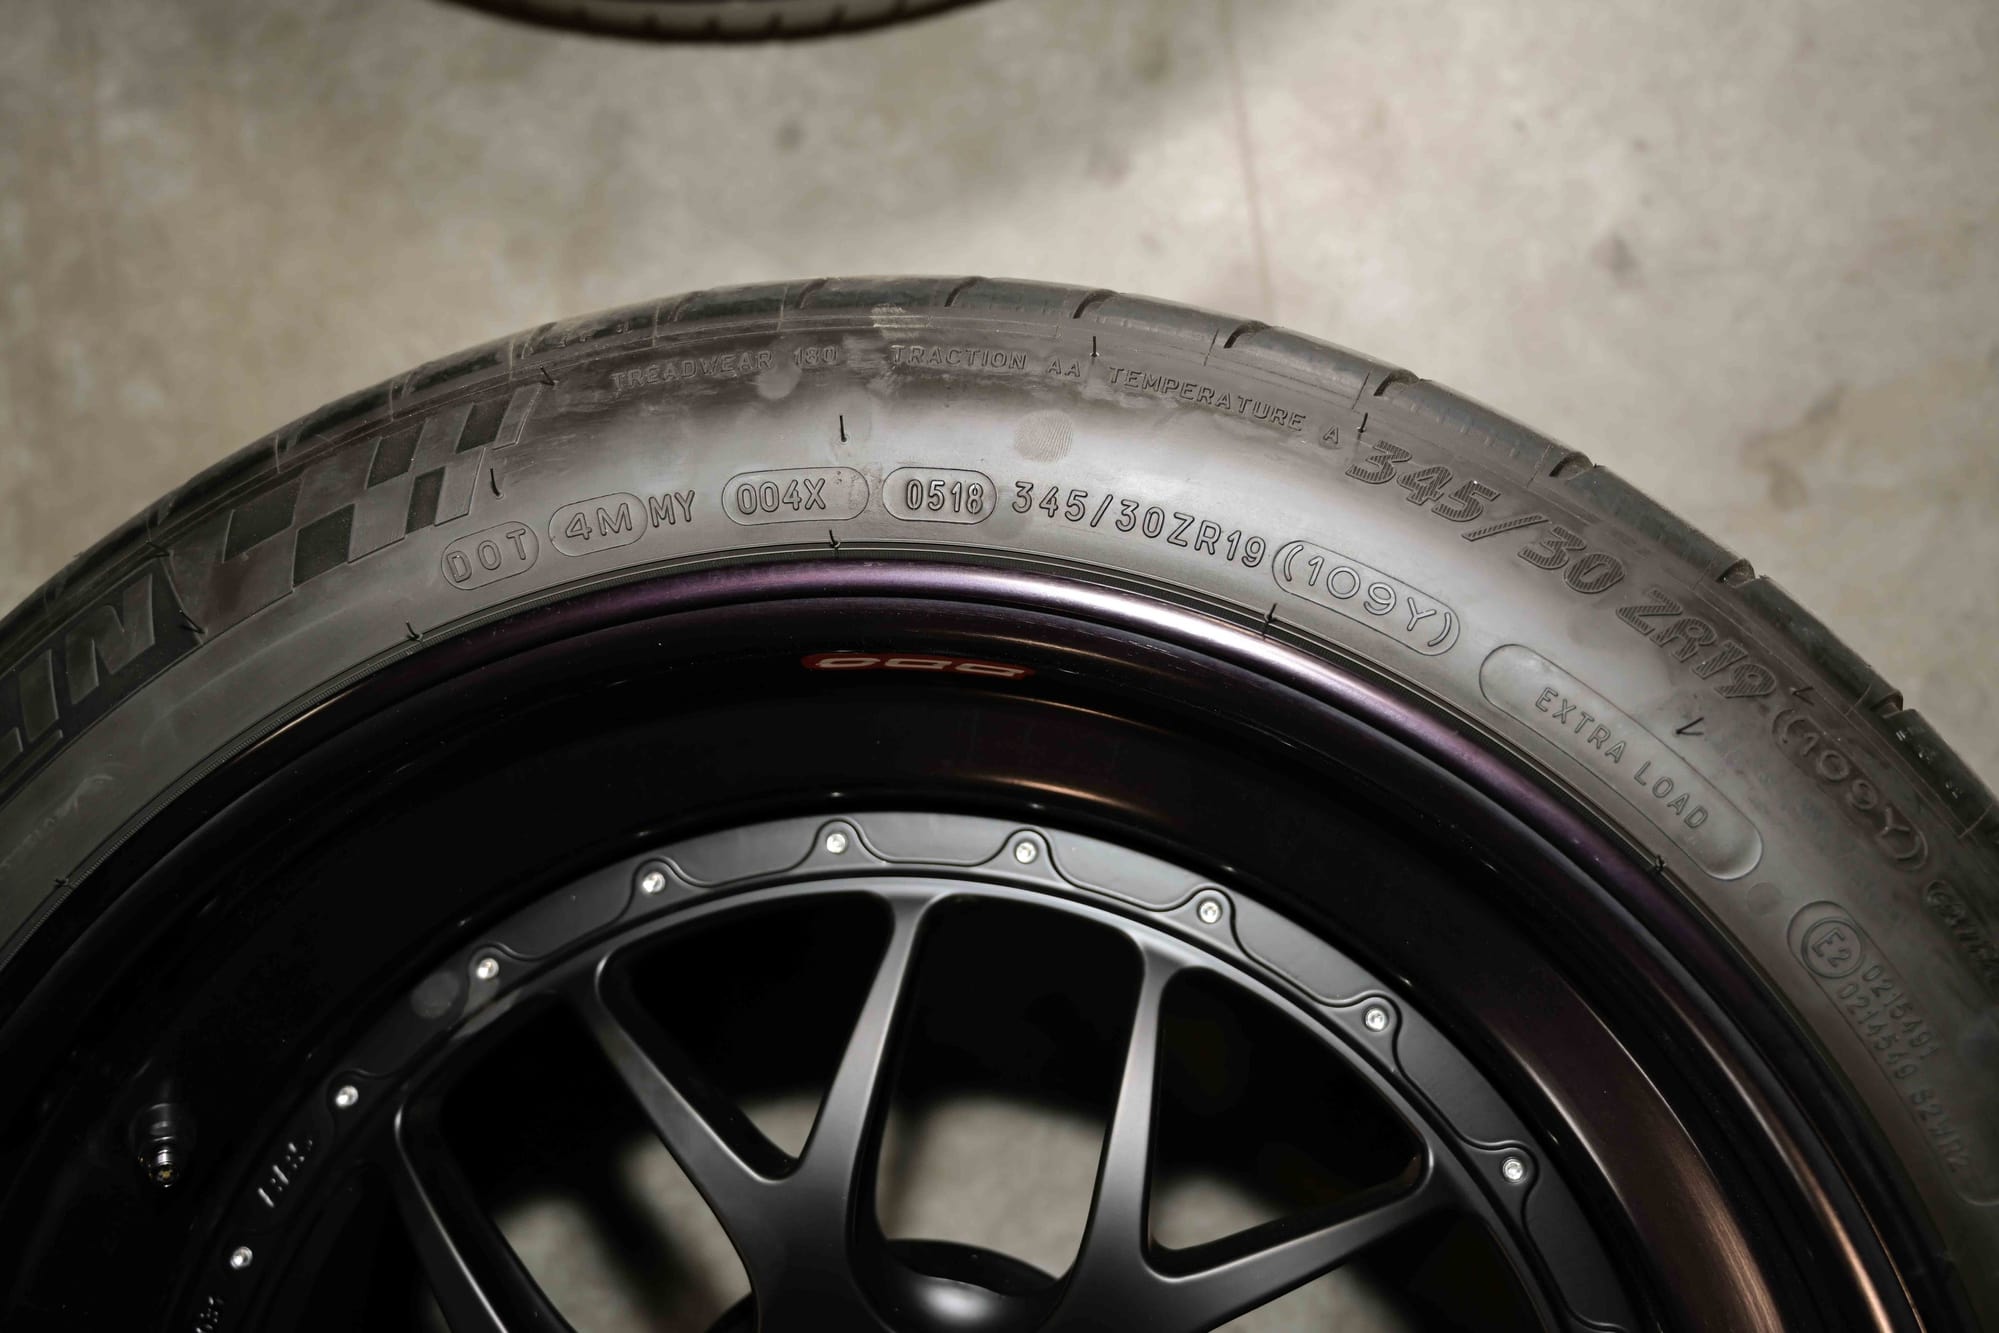 Wheels and Tires/Axles - 19" BBS Wheels for 991 GT3RS - Used - 2016 to 2019 Porsche GT3 - Las Vegas, NV 89118, United States